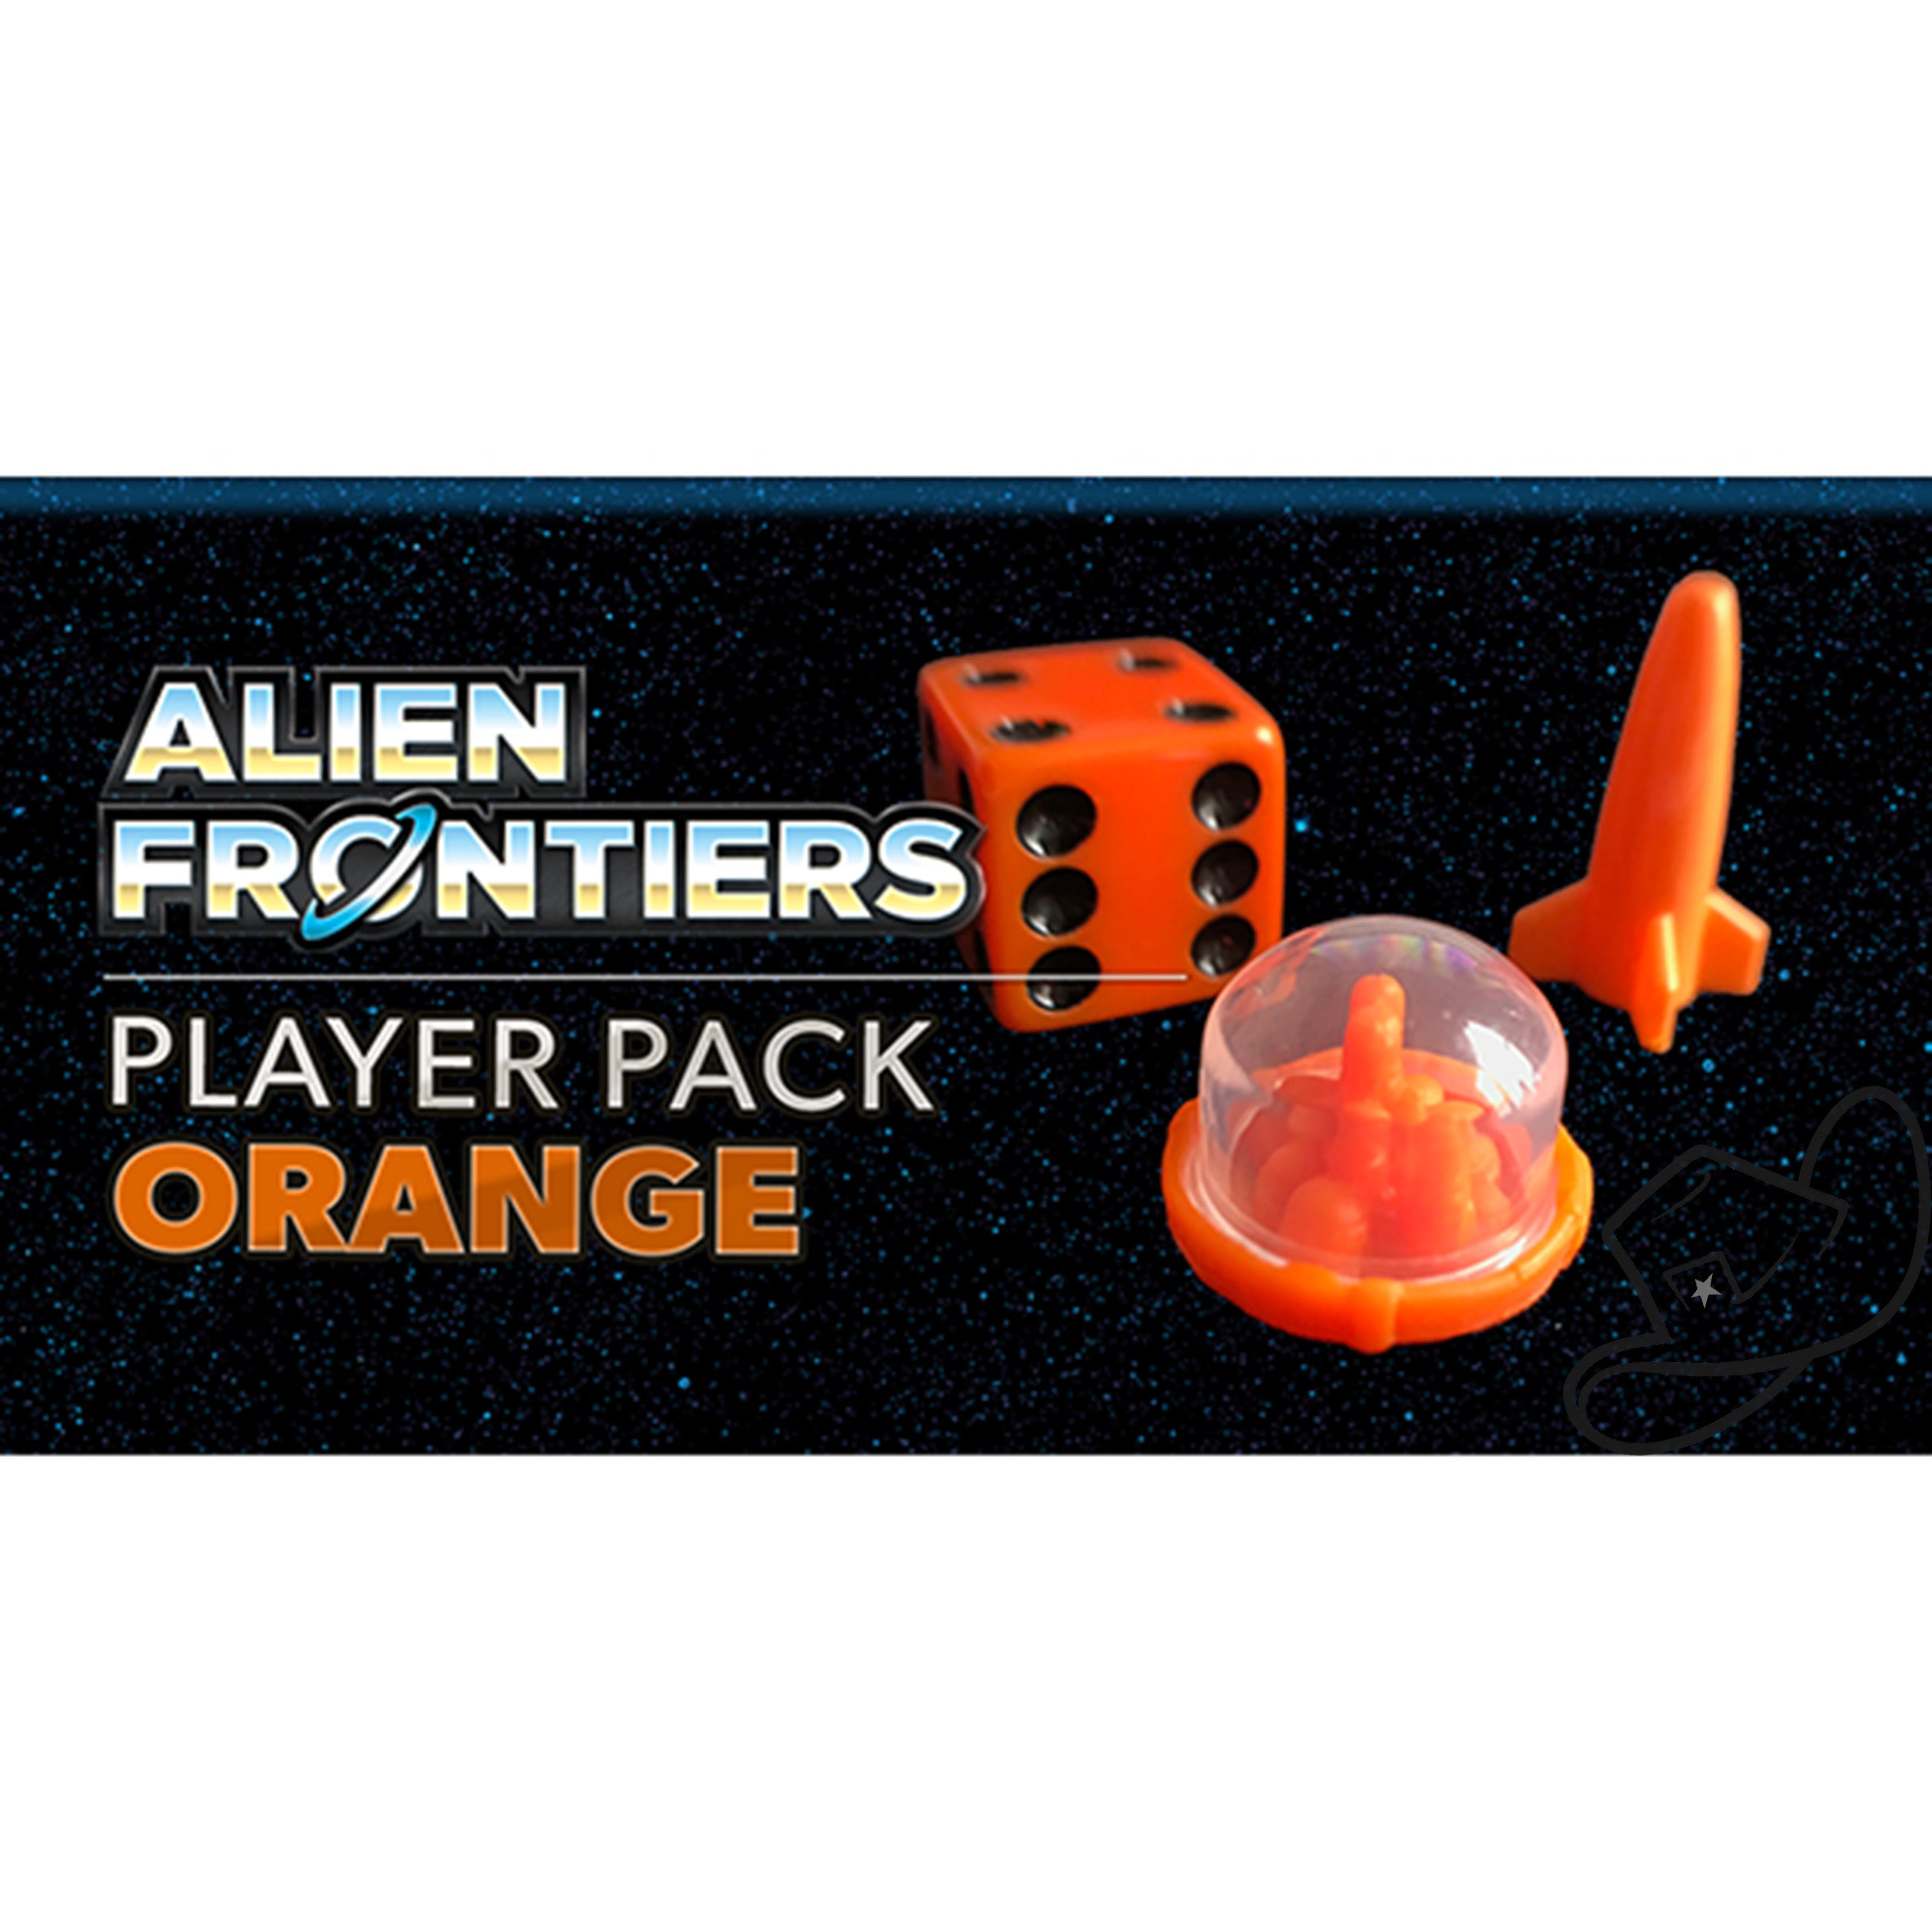 Alien frontiers players pack Orange contains all the pieces needed to add a new player